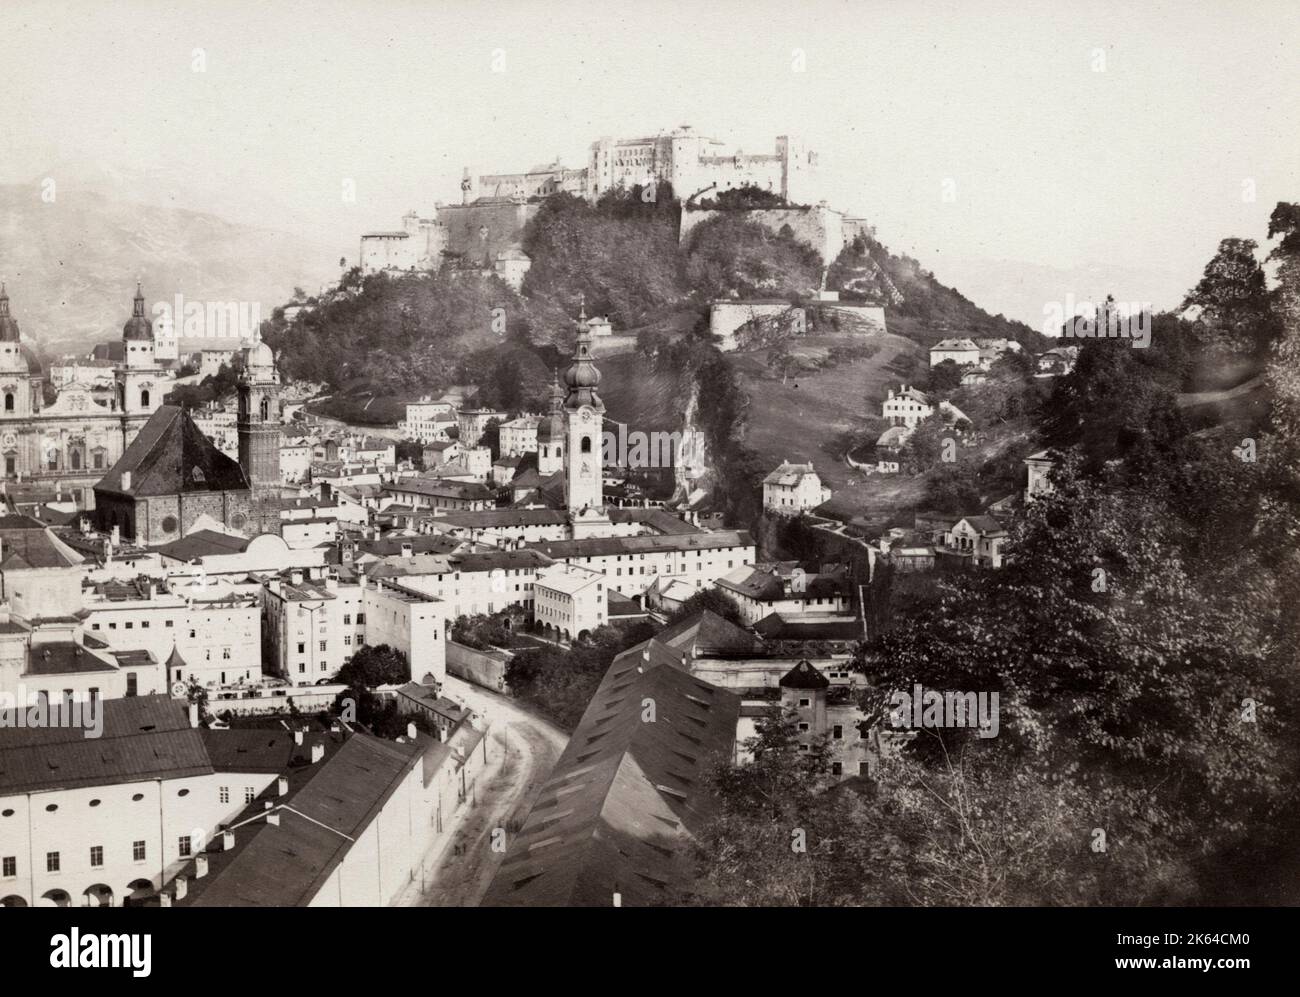 Vintage 19th century photograph - Salzburg is an Austrian city on the border of Germany, with views of the Eastern Alps. The city is divided by the Salzach River, with medieval and baroque buildings of the pedestrian Altstadt (Old City) on its left bank, facing the 19th-century Neustadt (New City) on its right. Stock Photo